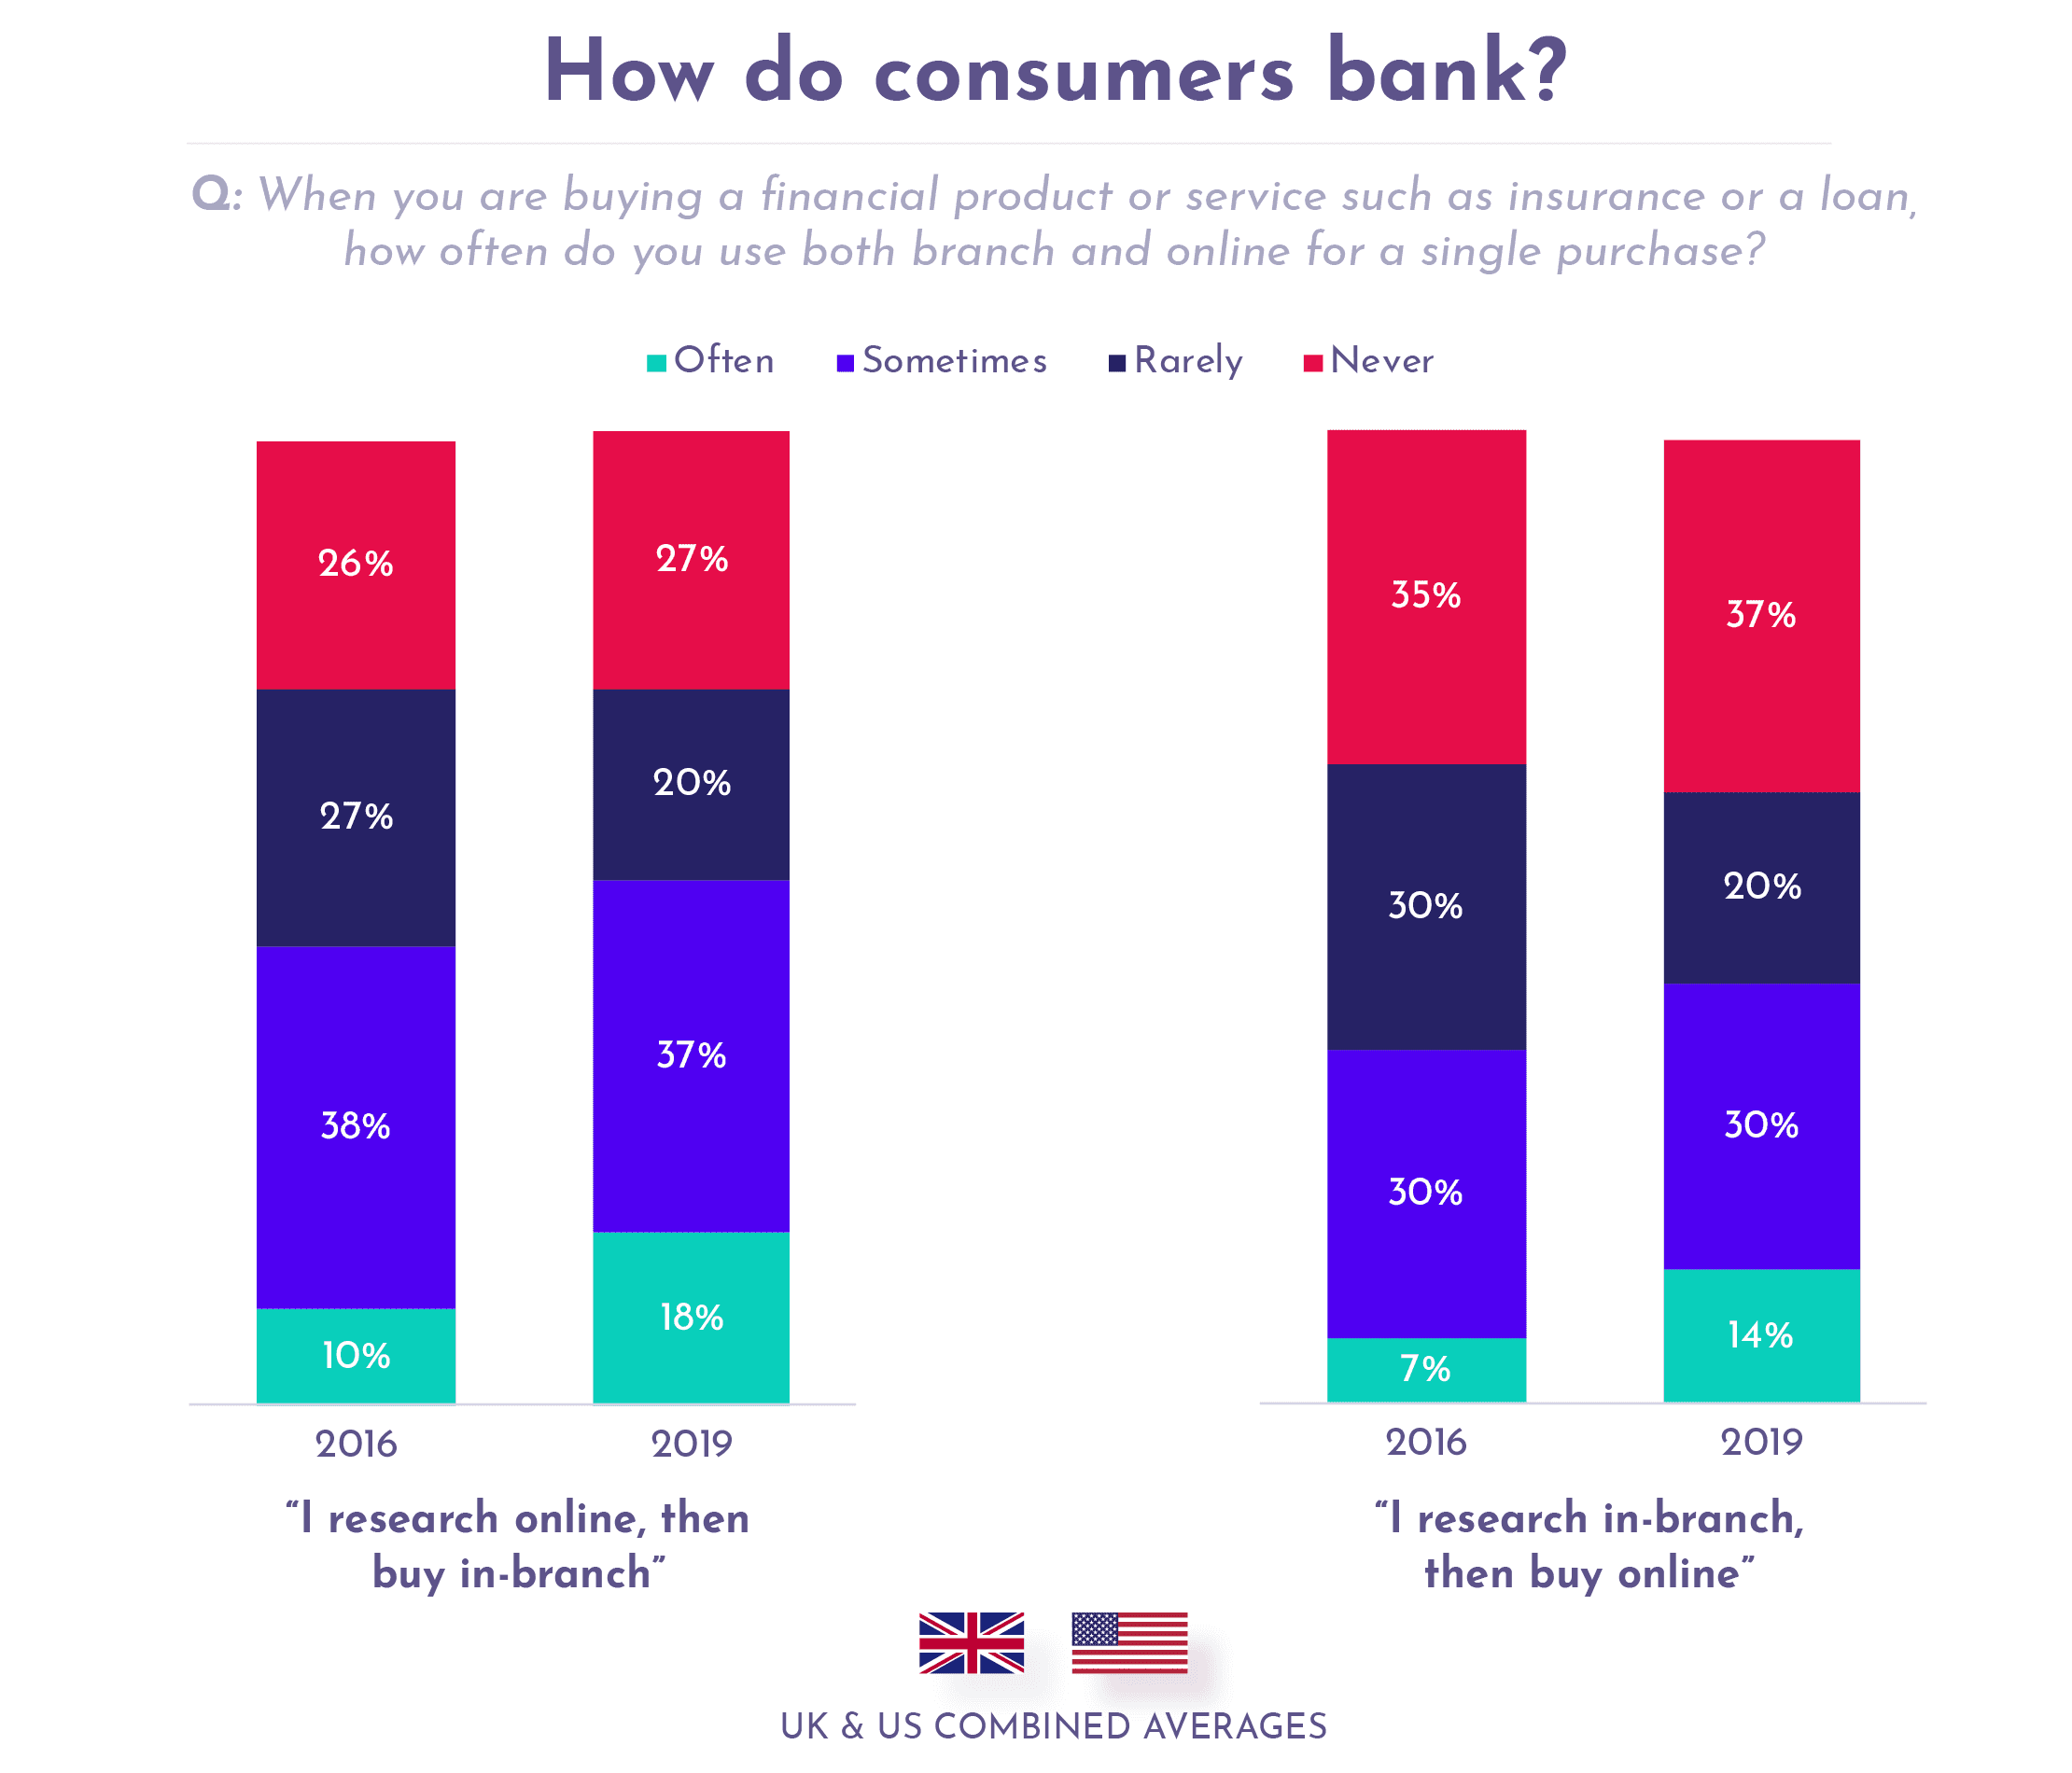 How do consumers bank? A graph showing the percentages that consumers do research online then buy in person or research in-branch then buy online